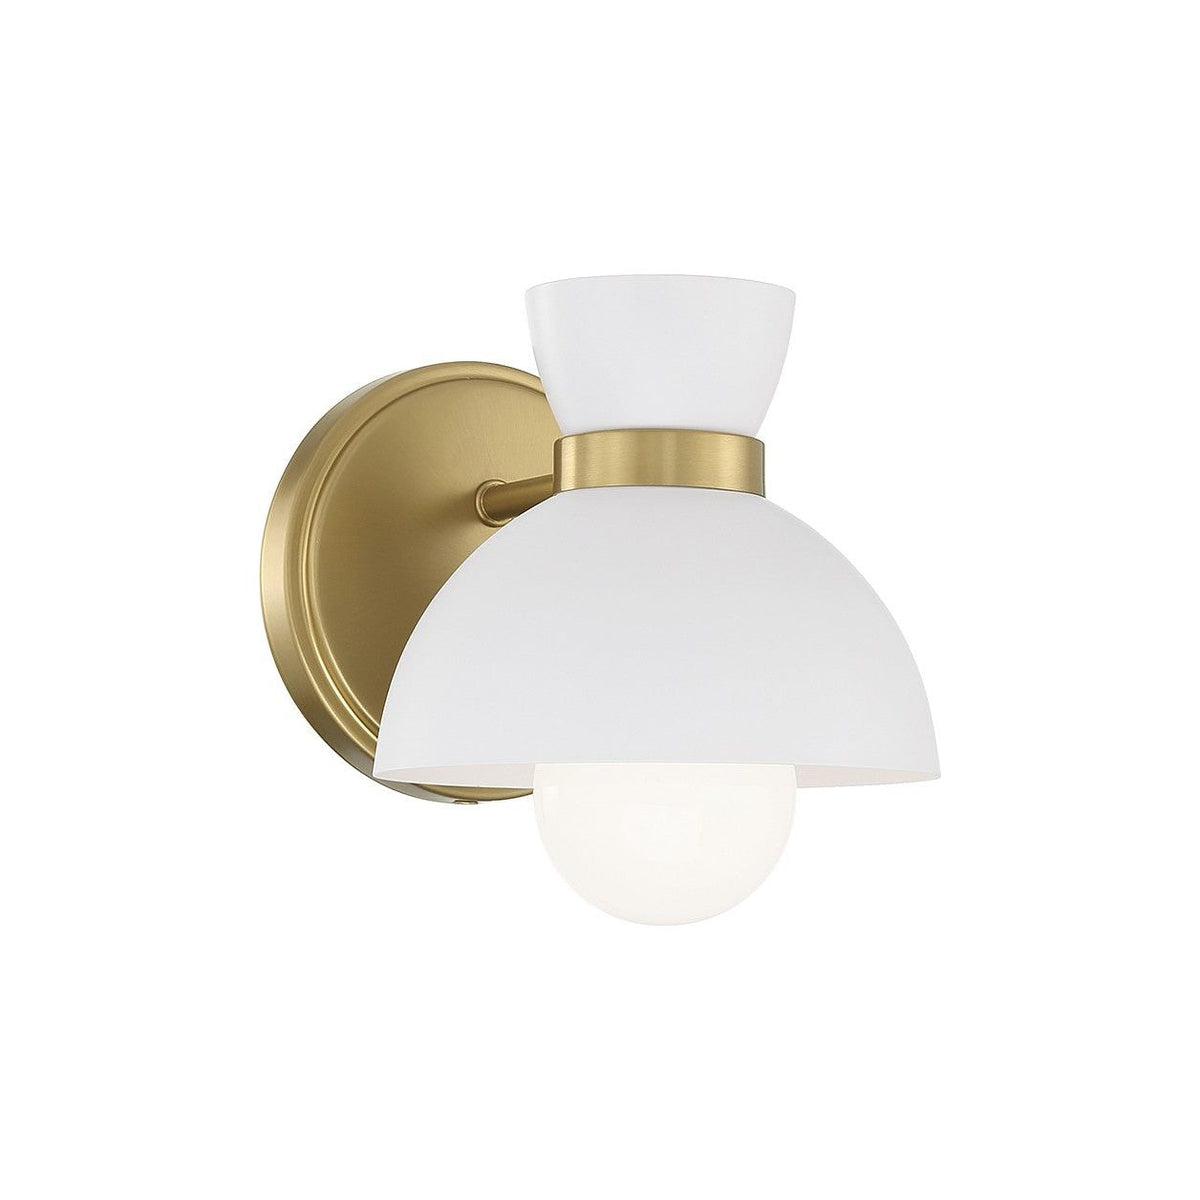 Meridian - M90101NB - One Light Wall Sconce - Natural Brass